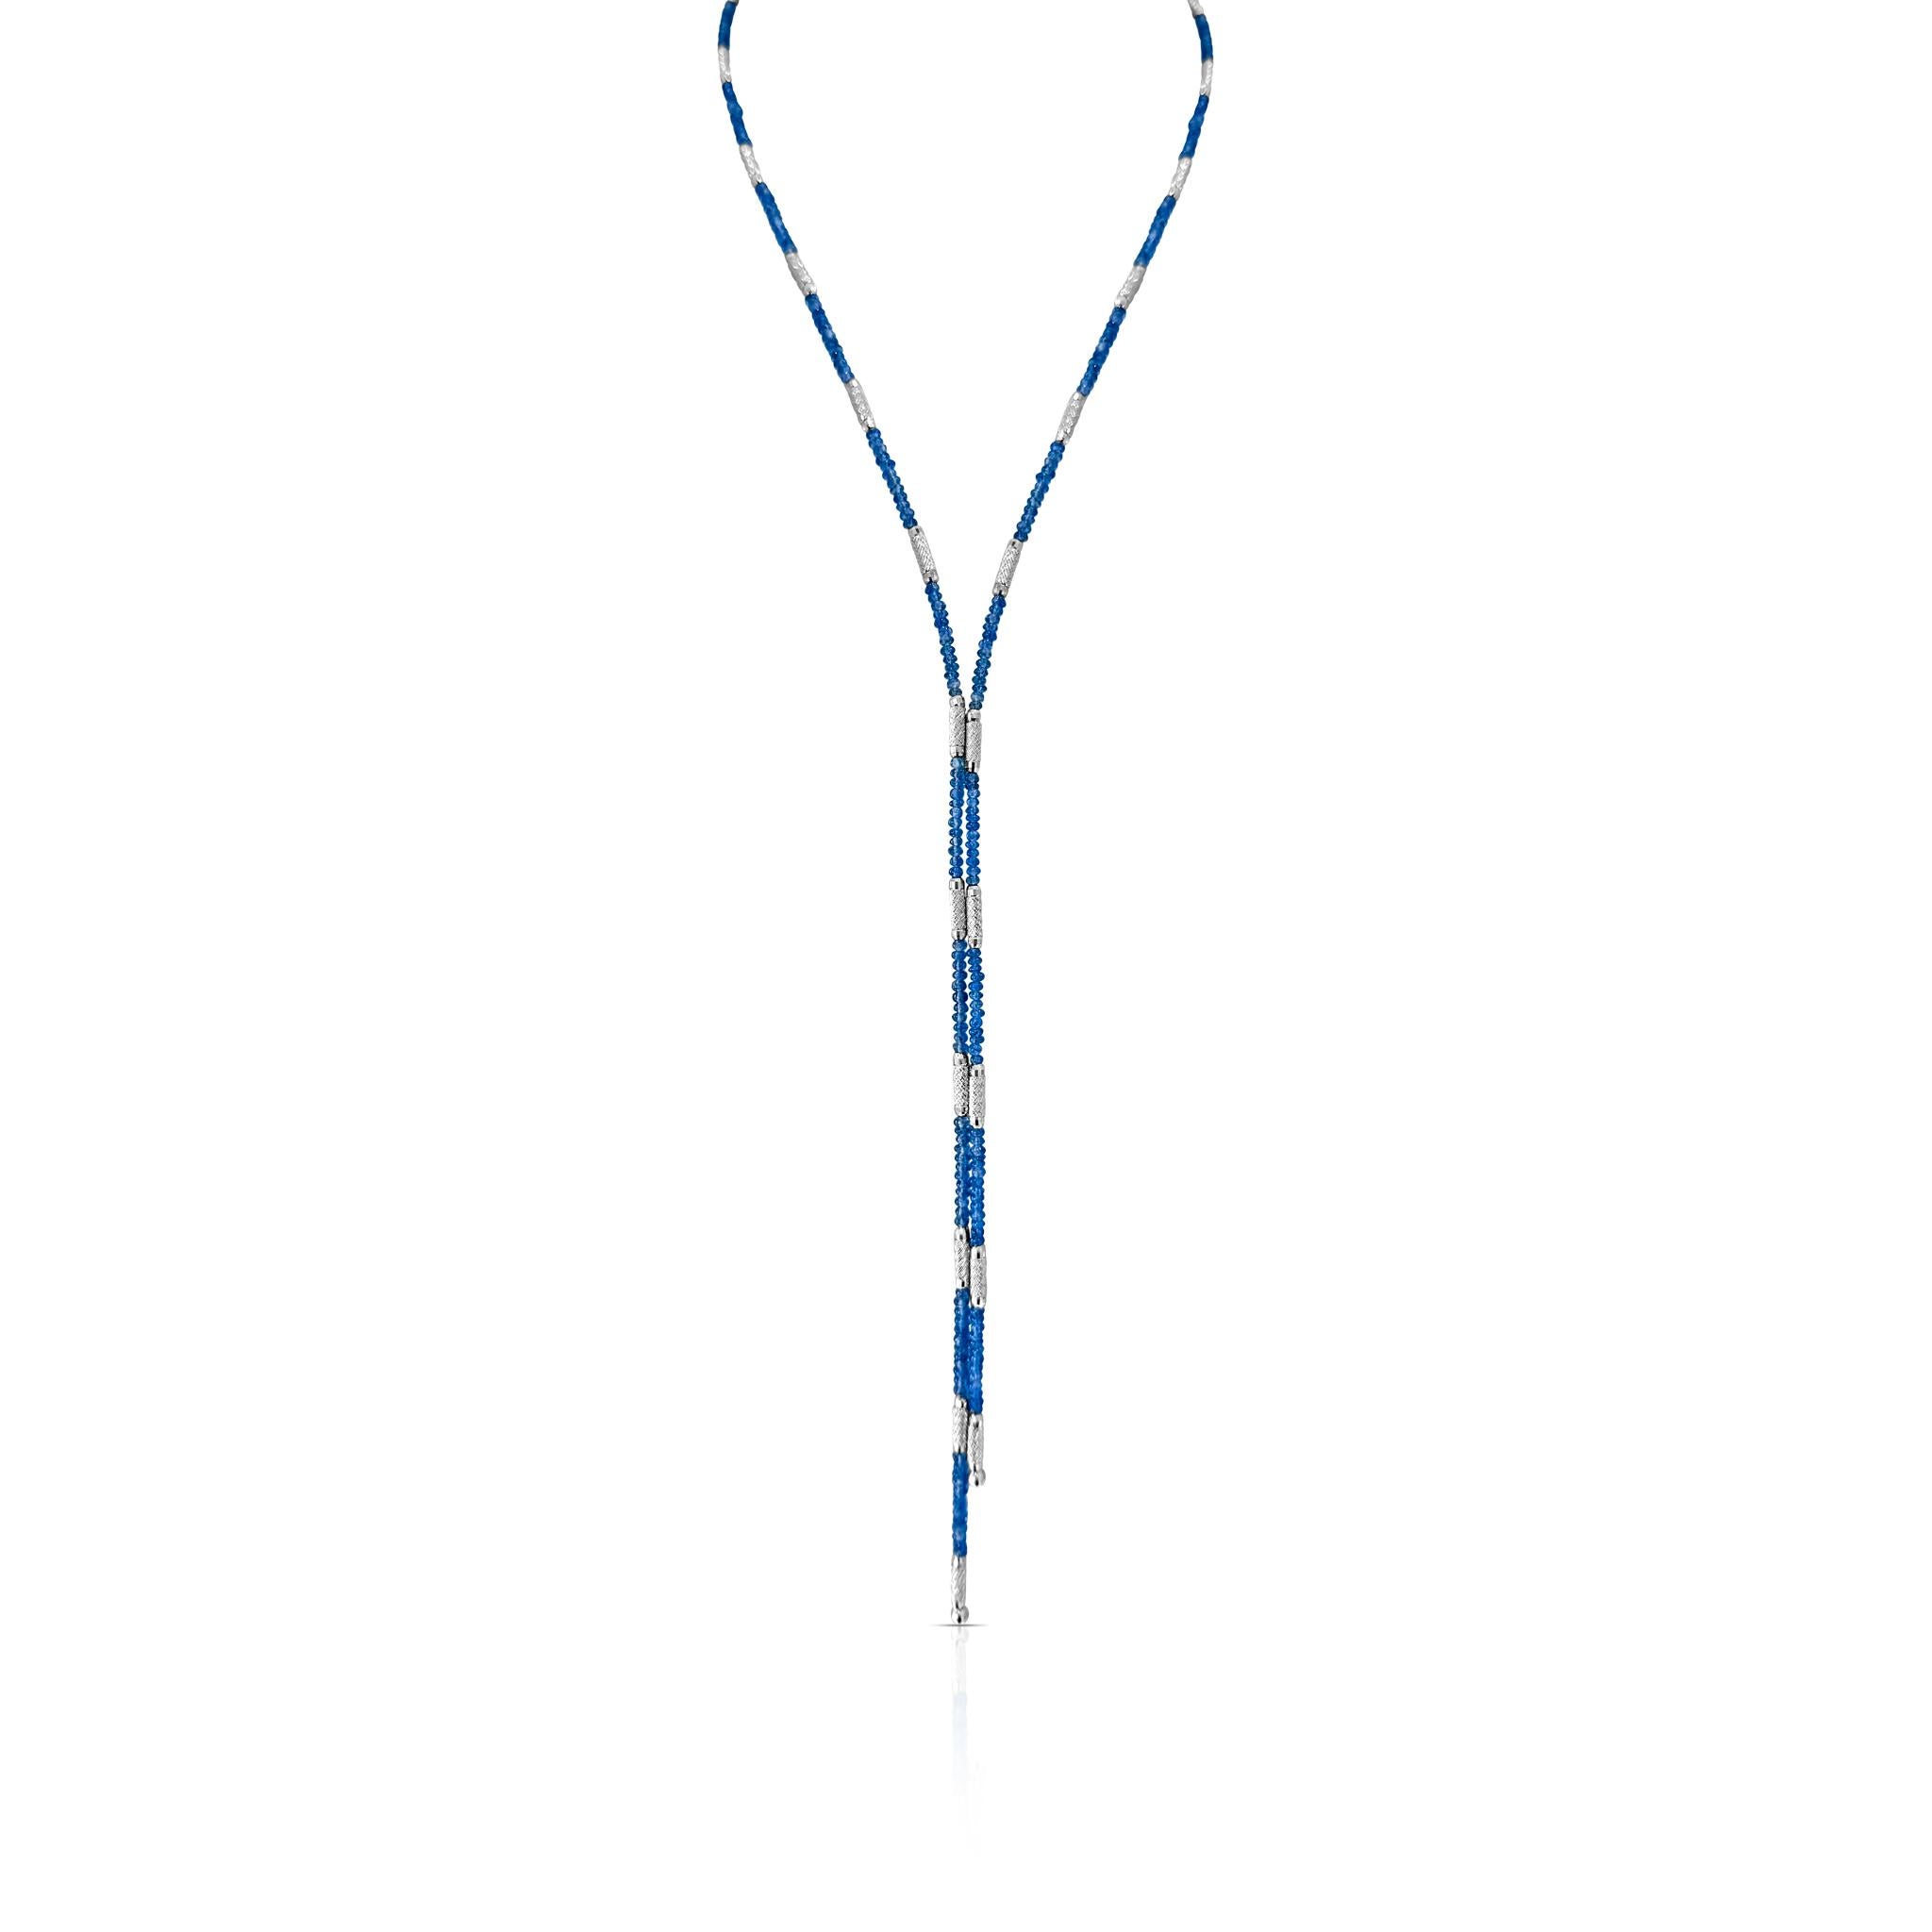 Tresor Beautiful Necklace features 30.00 carats of Blue Sapphire. The Necklace are an ode to the luxurious yet classic beauty with sparkly gemstones and feminine hues. Their contemporary and modern design make them versatile in their use. The